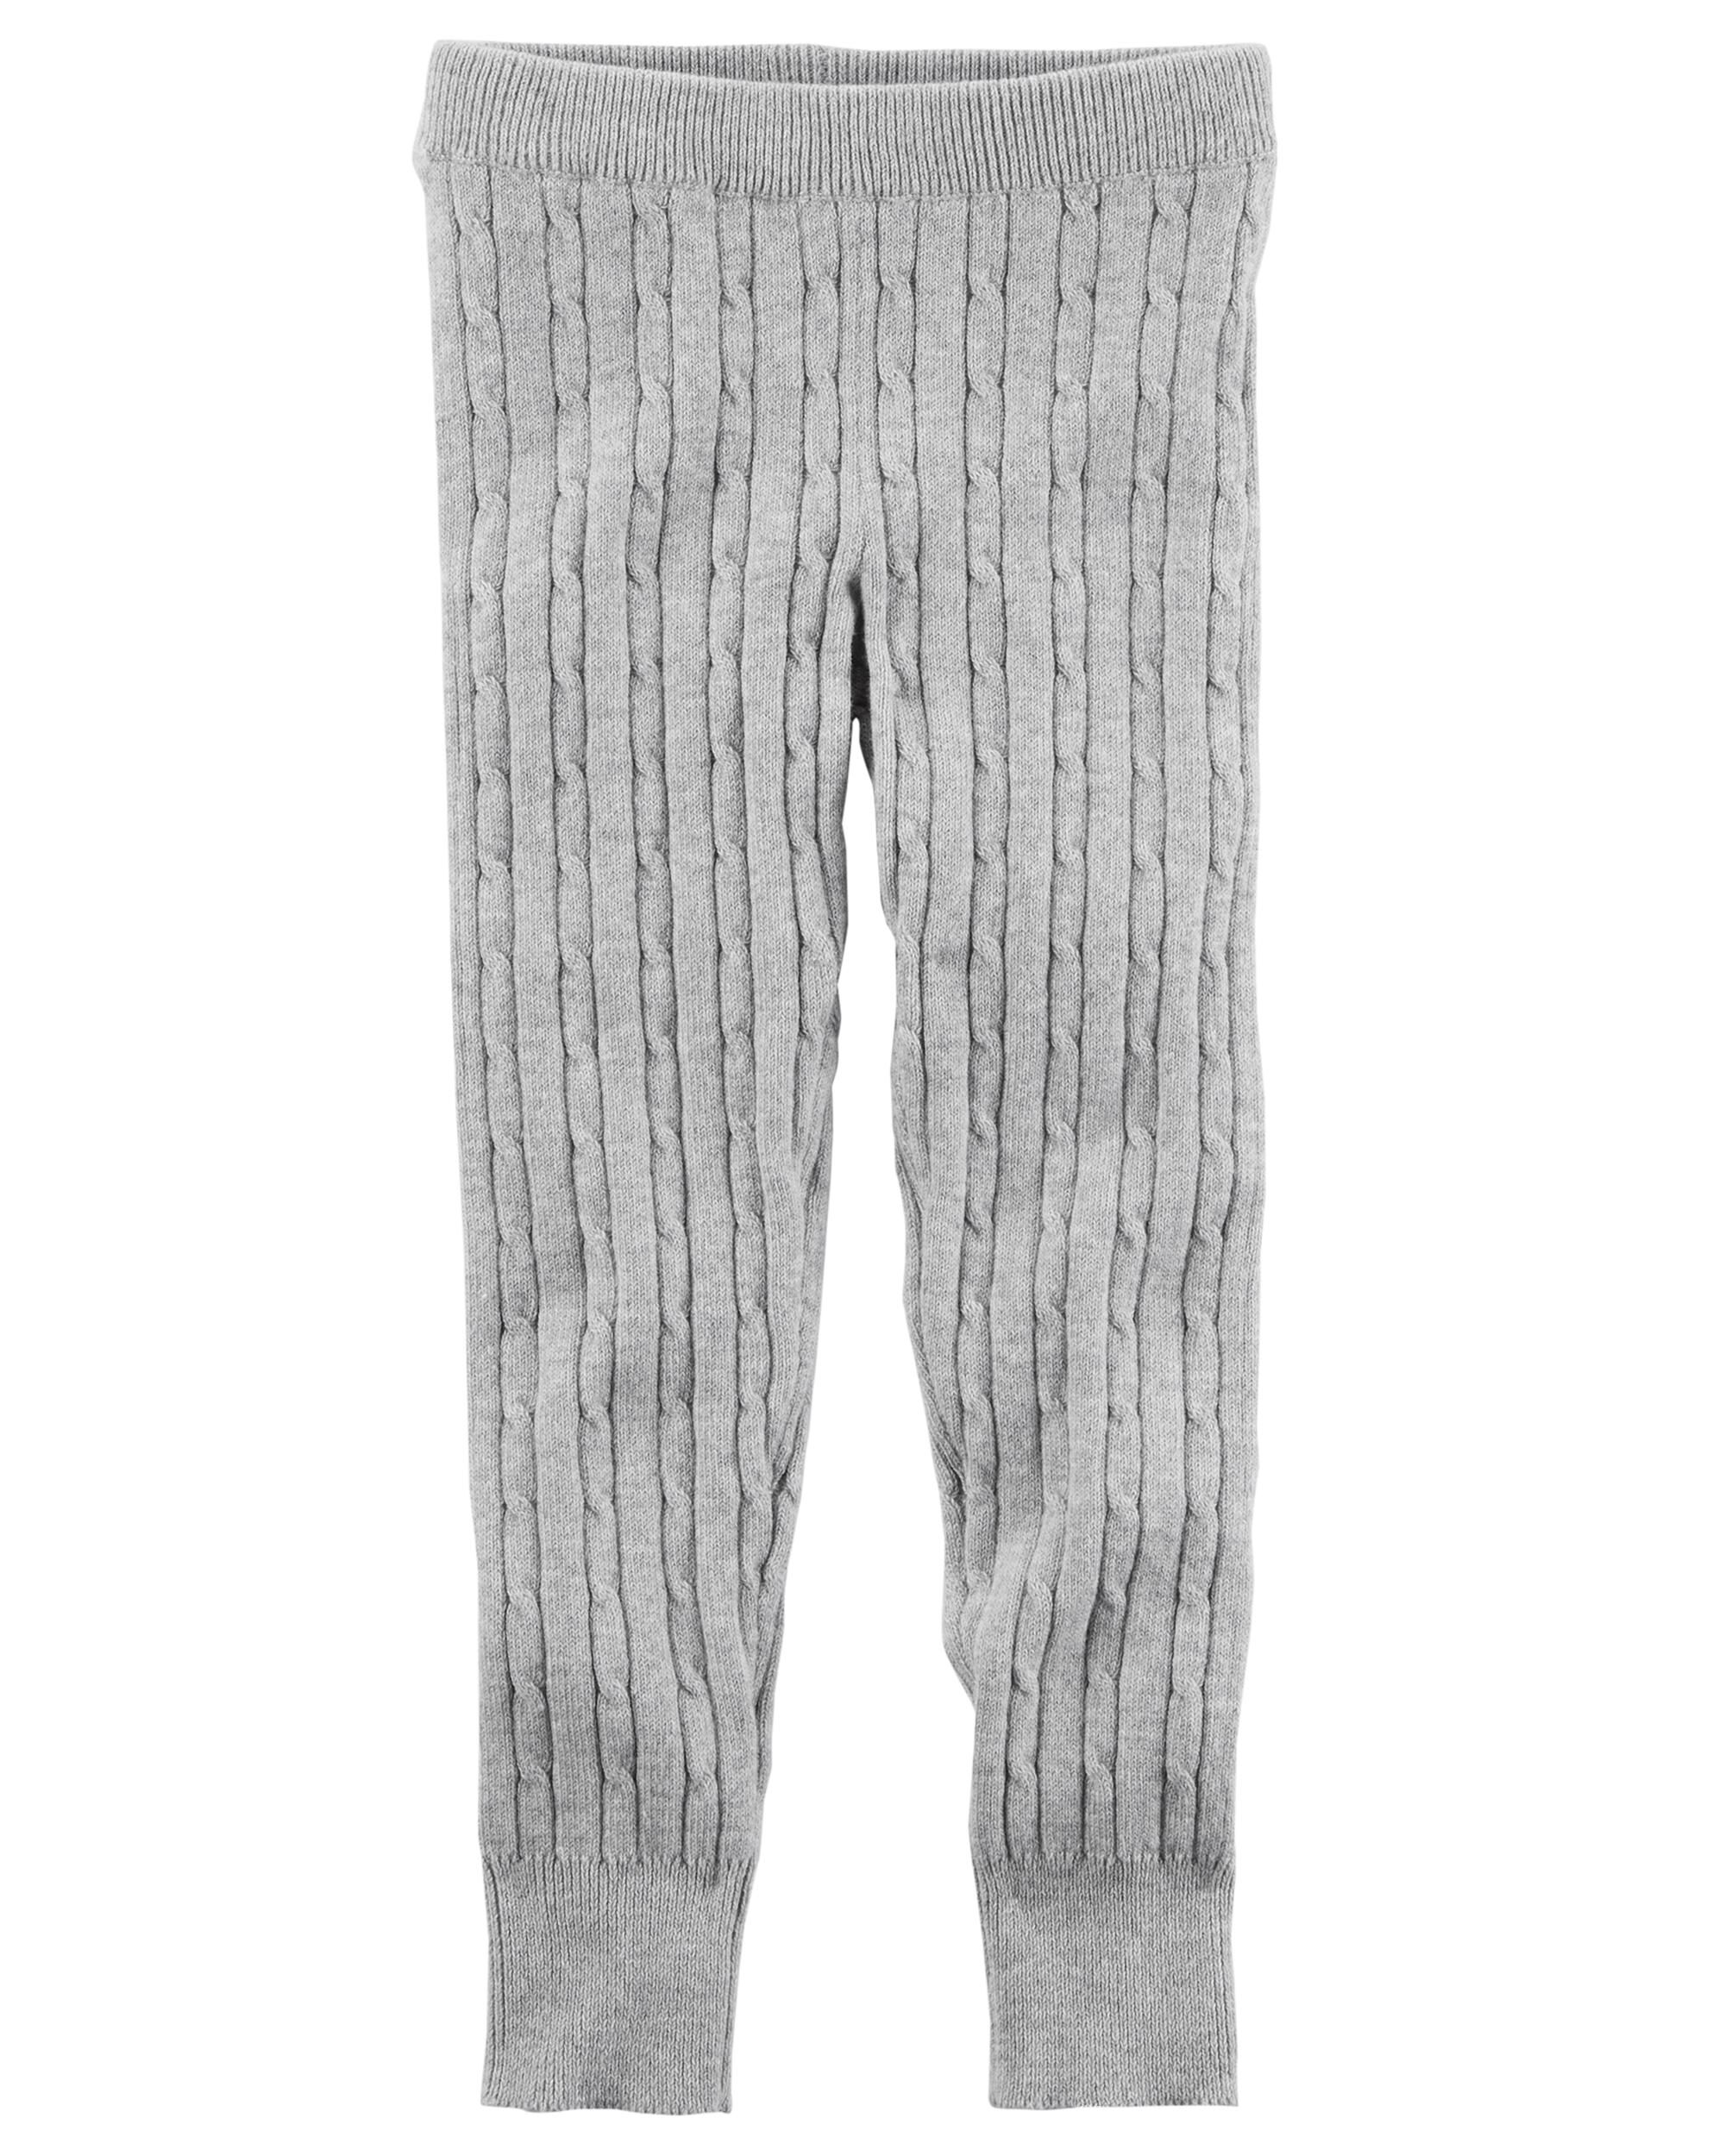 cable knit leggings baby